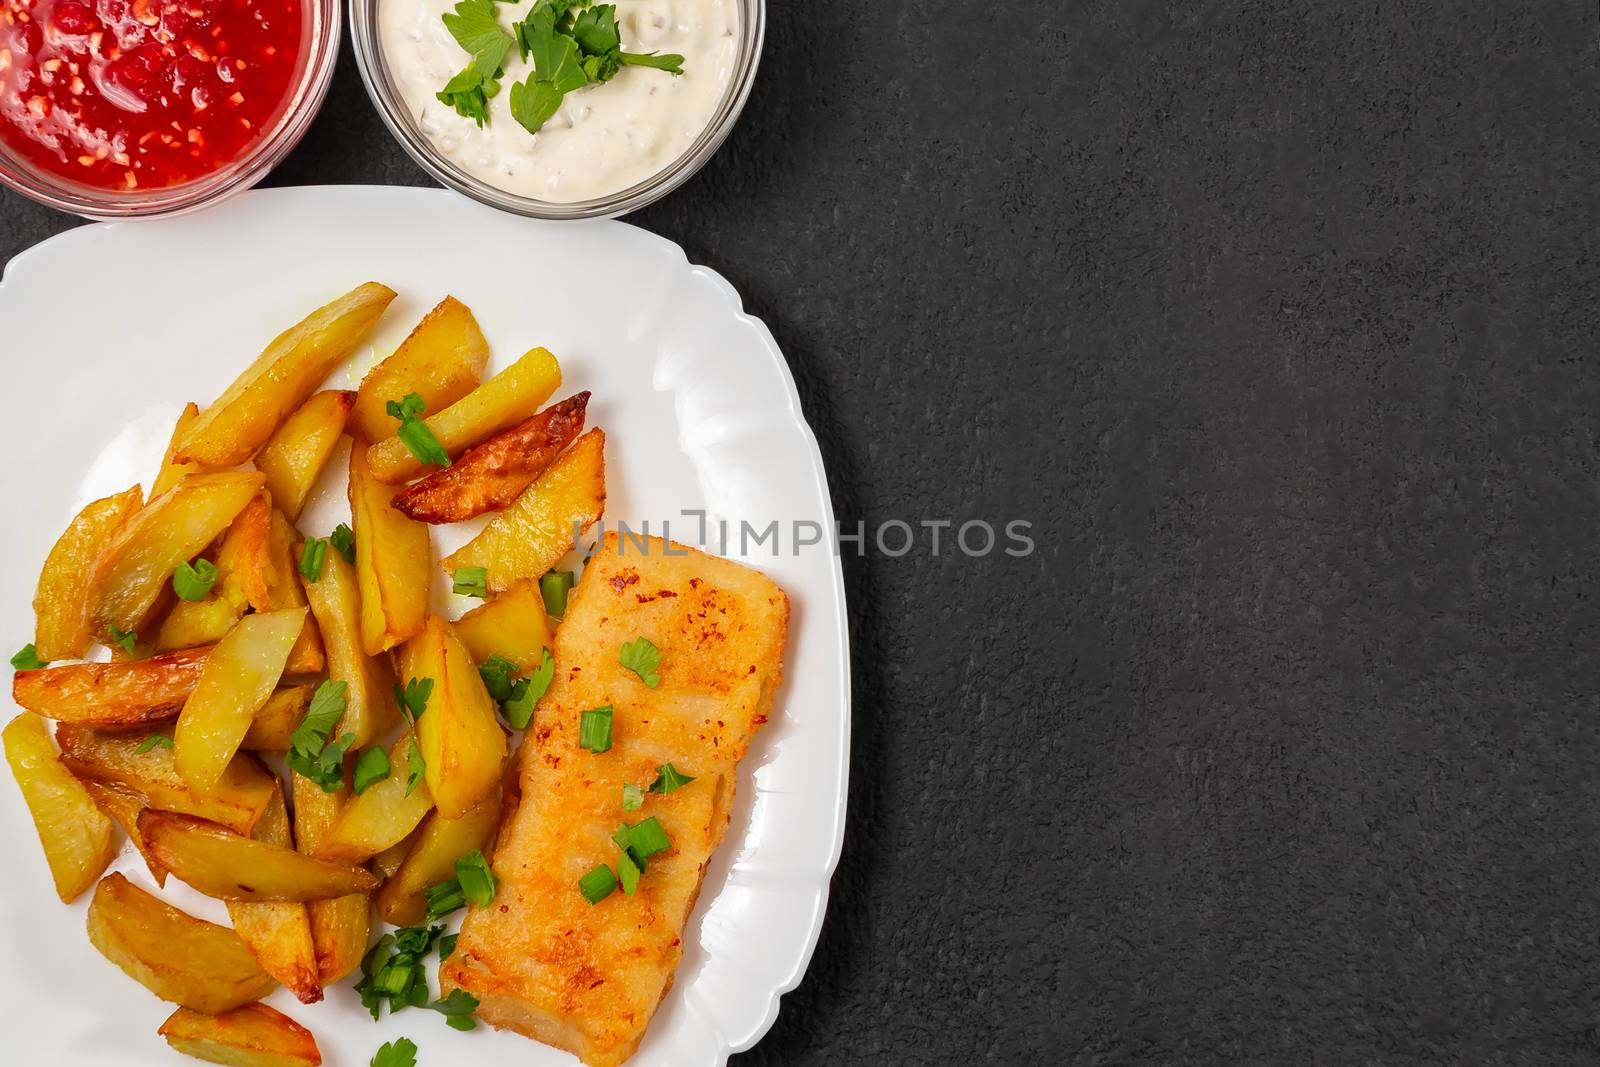 Fried fish and chips on a white plate on the kitchen table with tomato sauce, tartar sauce and pickled vegetables salad - photo, image. Flat lay, top view.